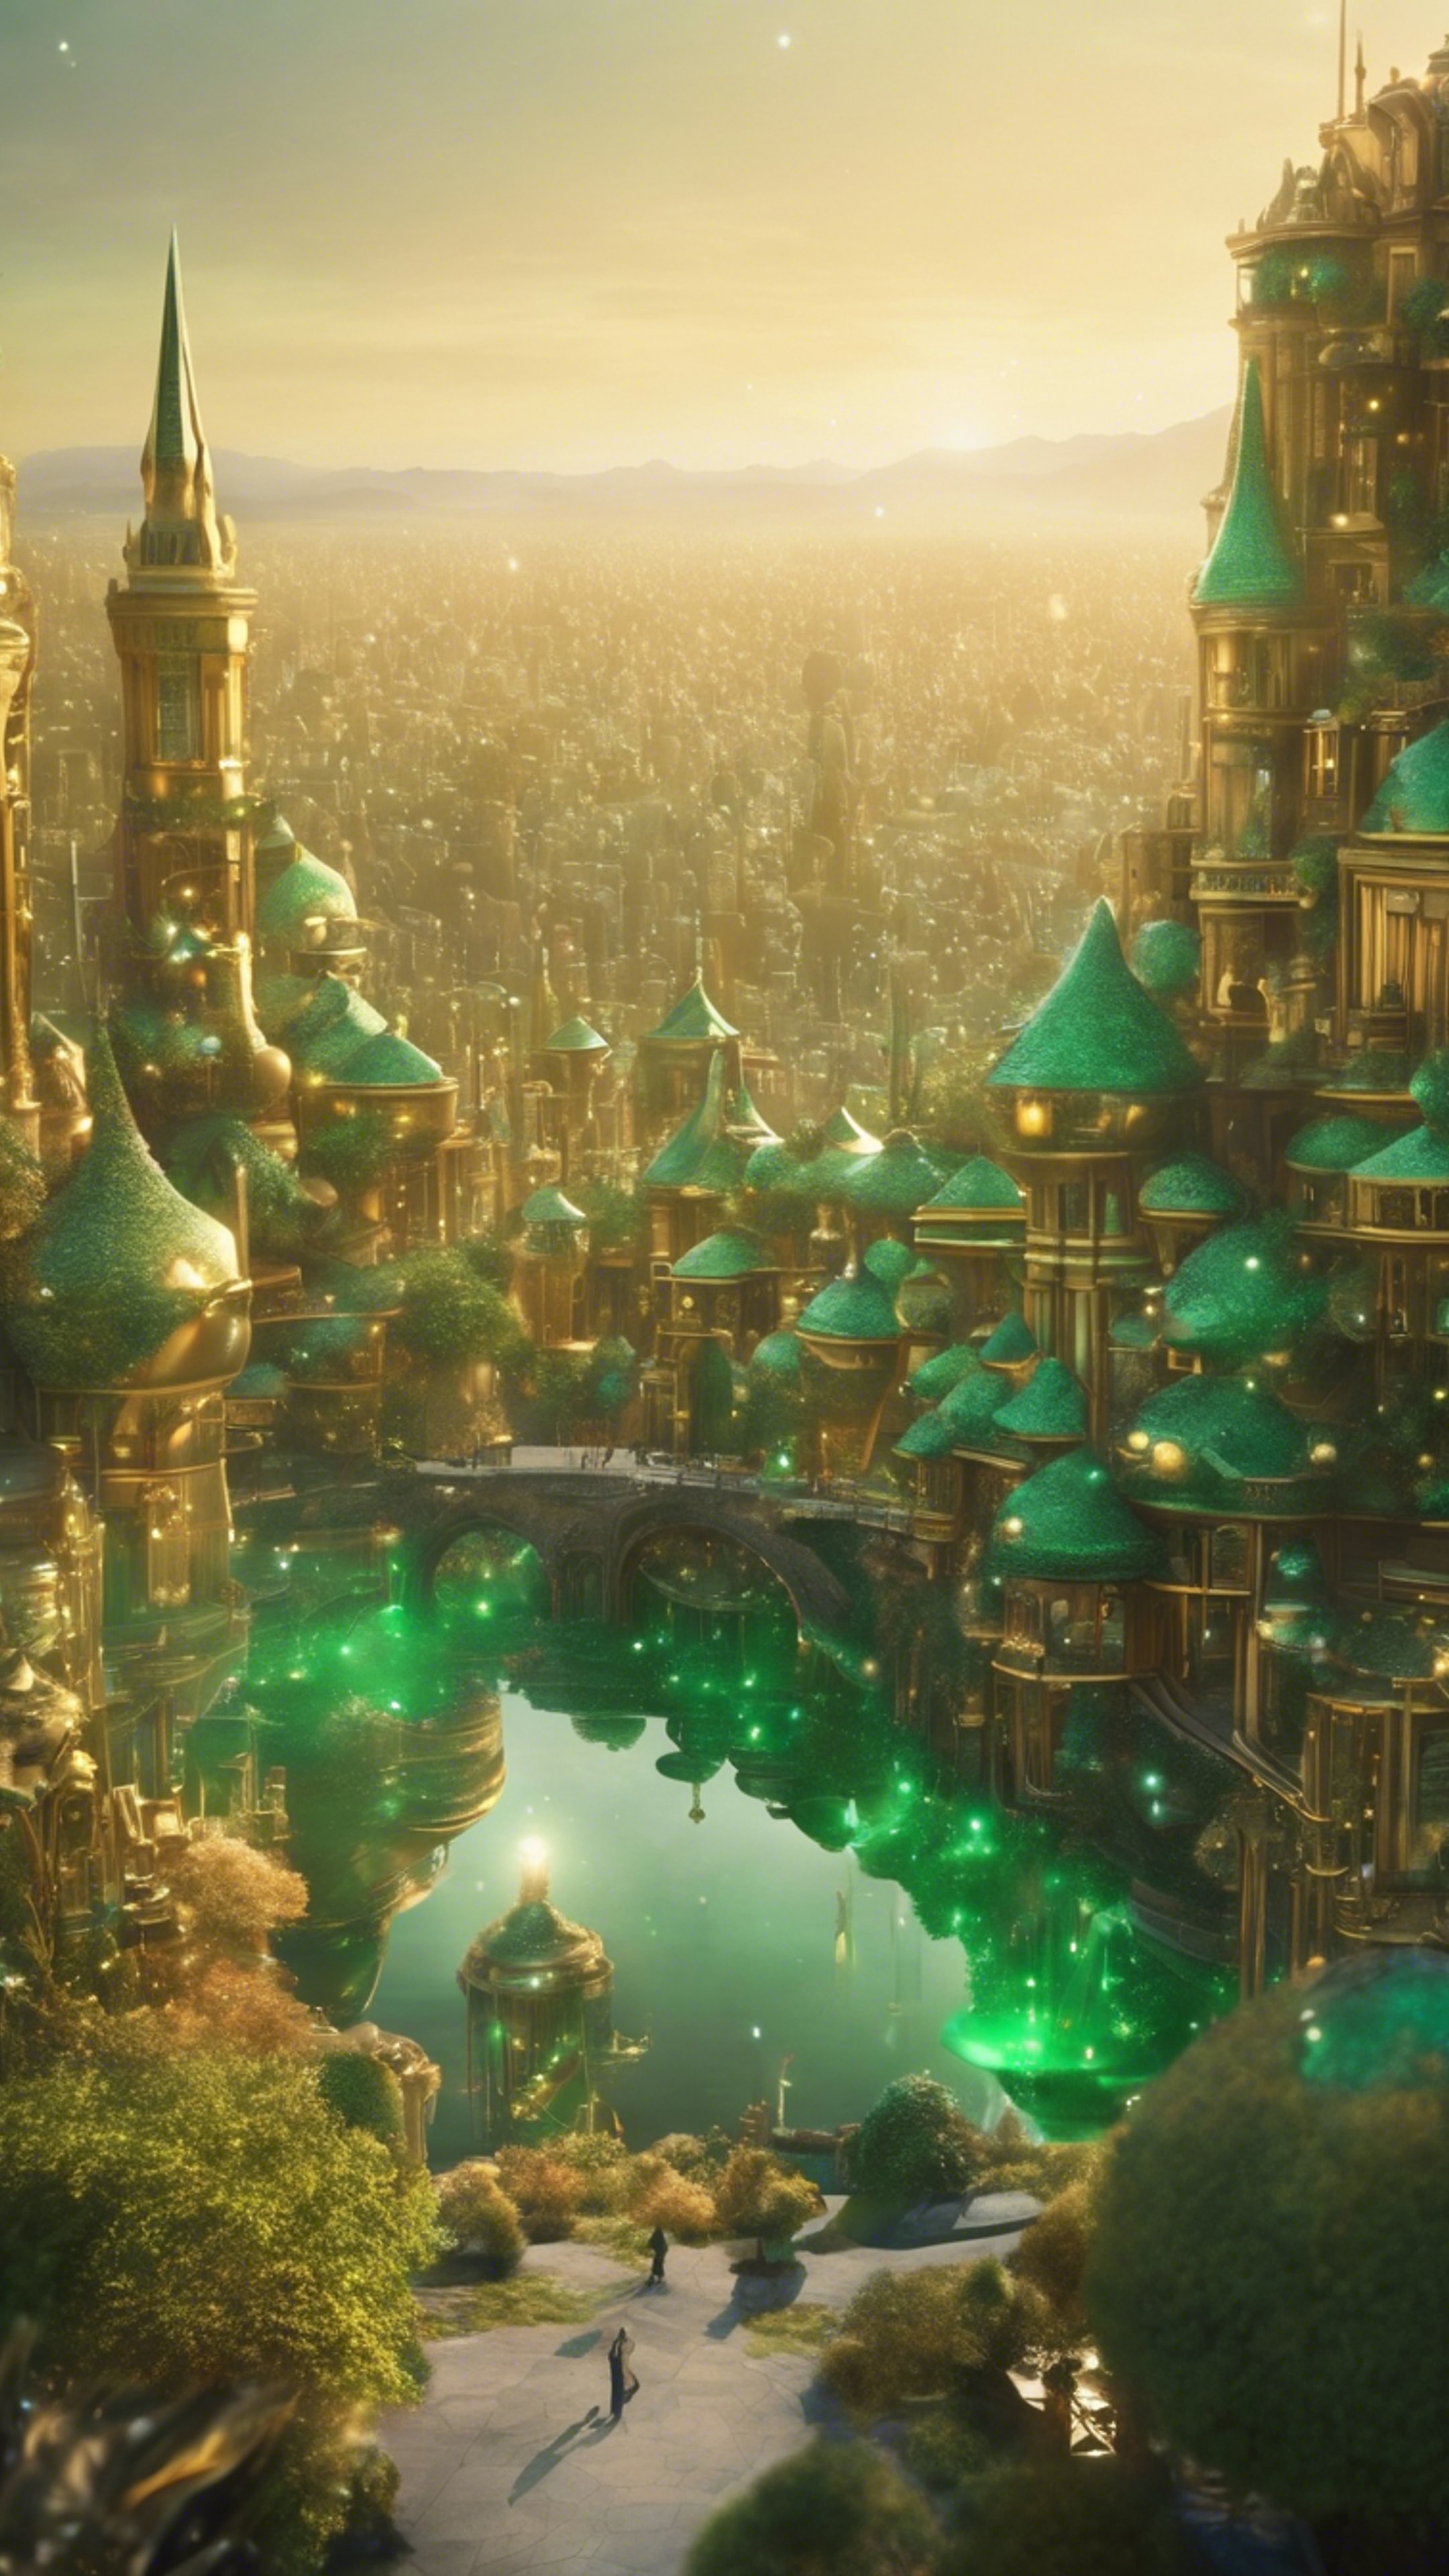 An emerald city shimmering in a golden mist within a dreamland. Wallpaper[436b81a71e38416794f3]